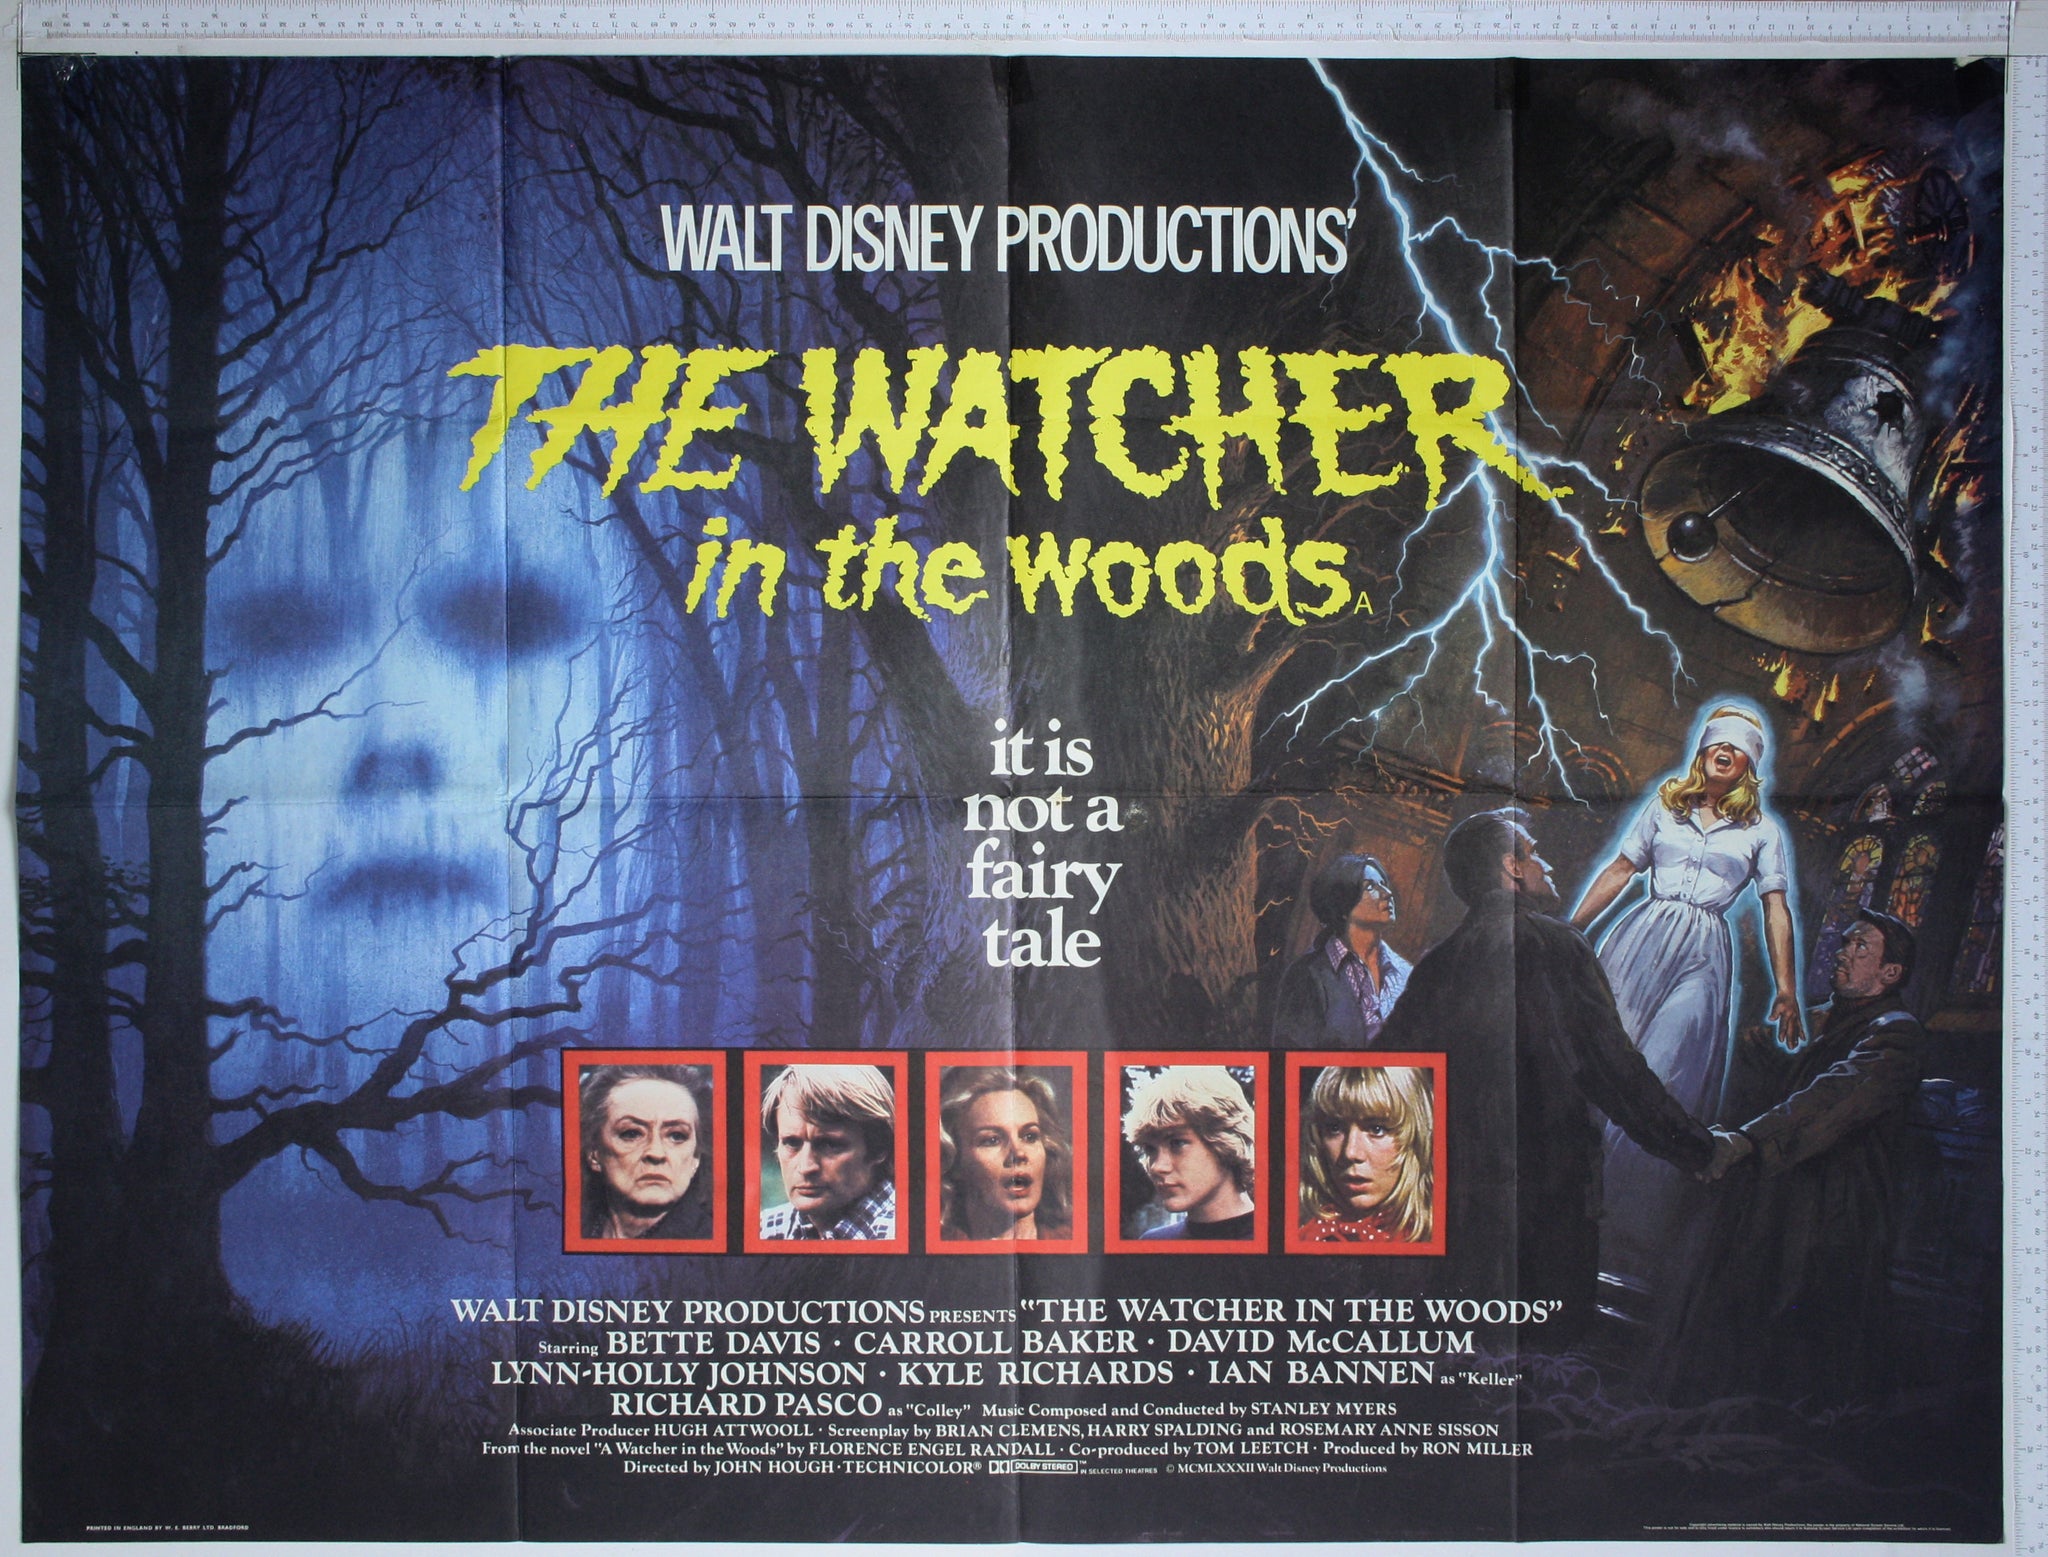 Watcher in the Woods (1980) UK Quad Poster #New